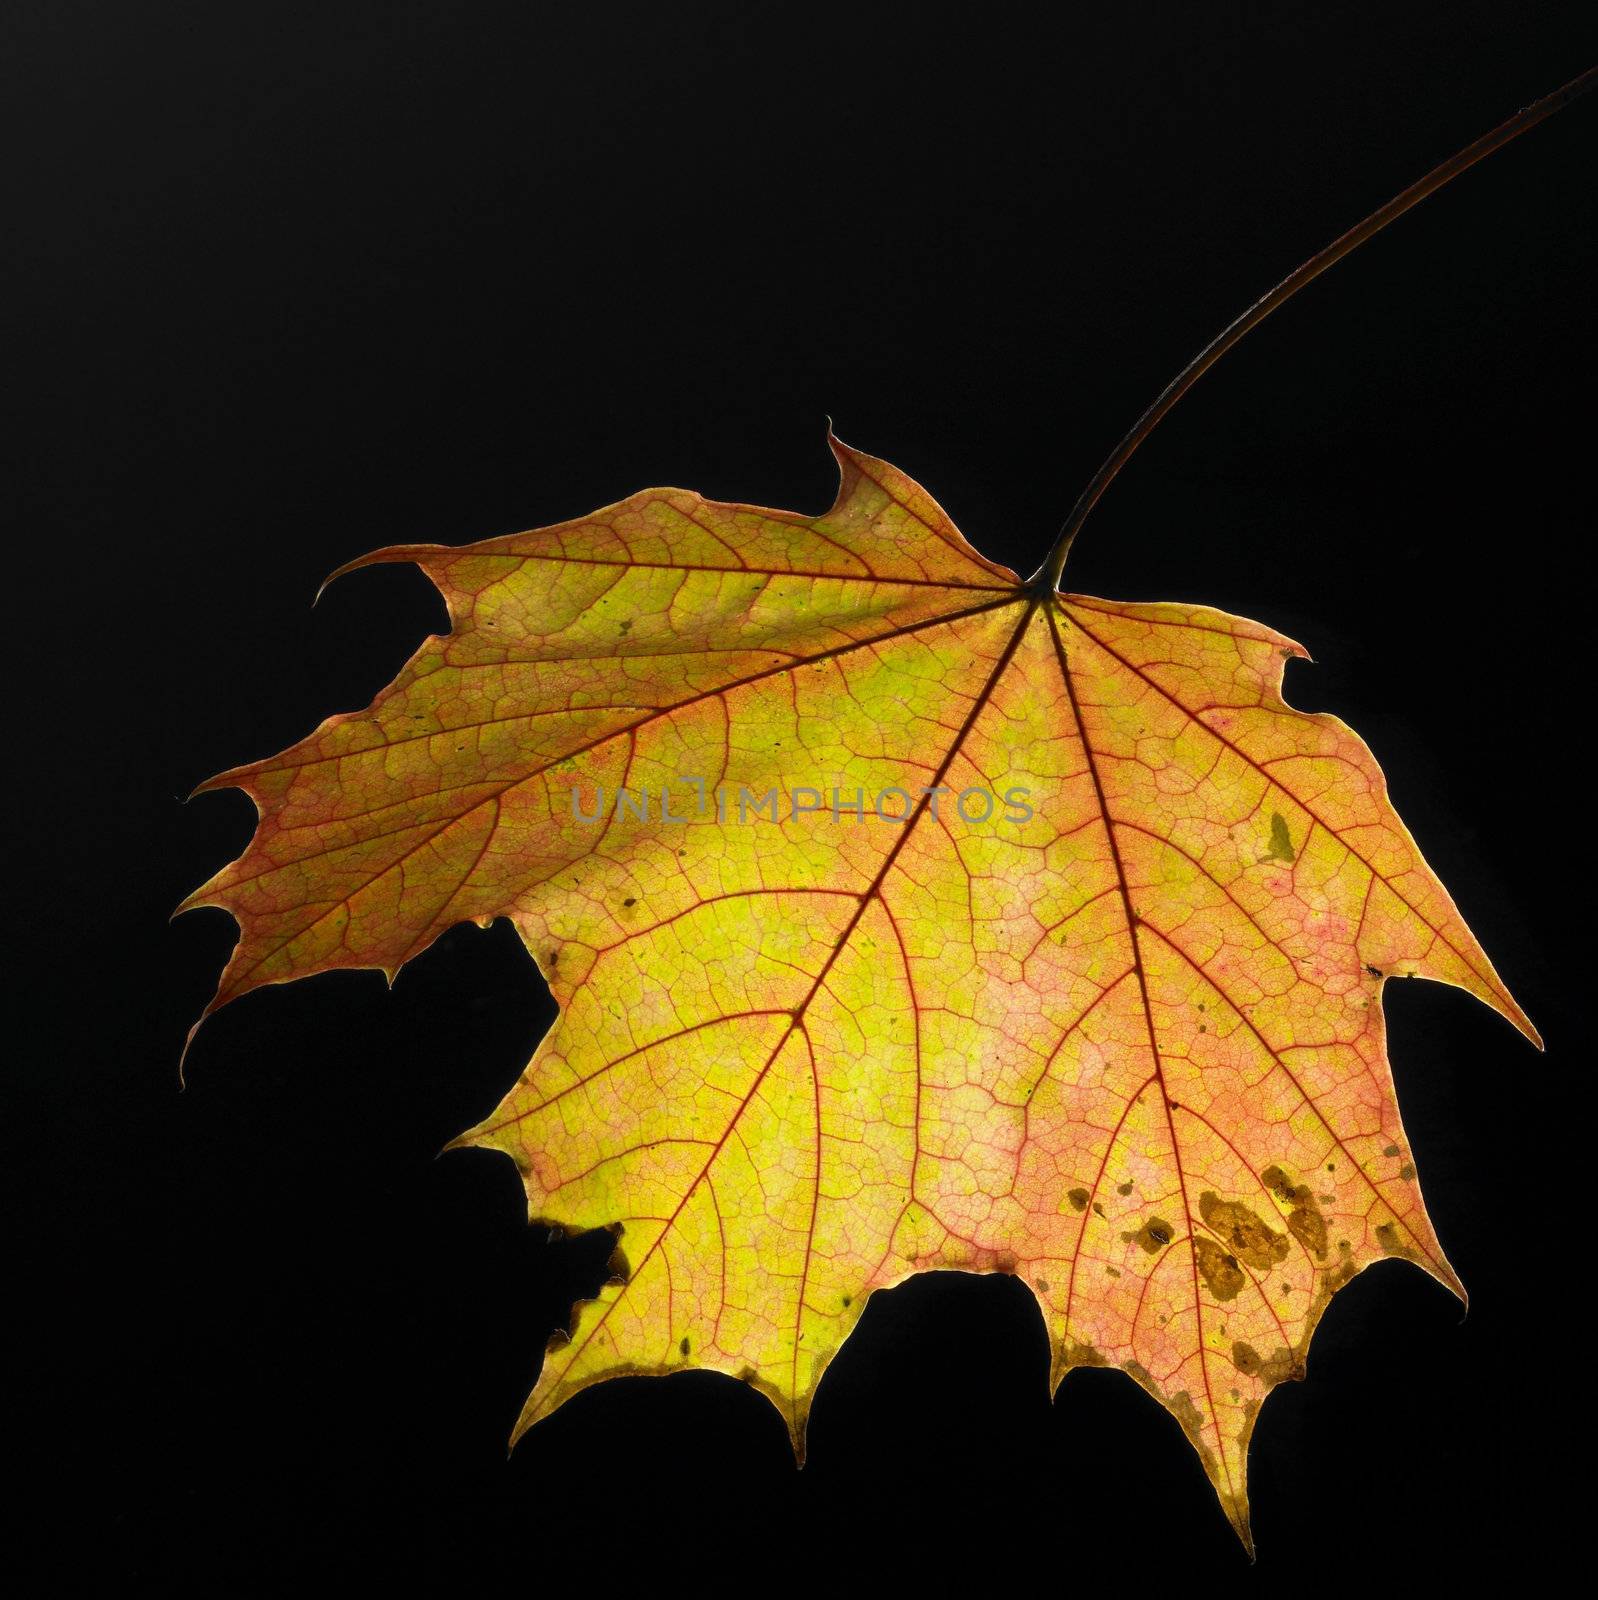 studio shot of a warm colored autumn leaf in gradient back